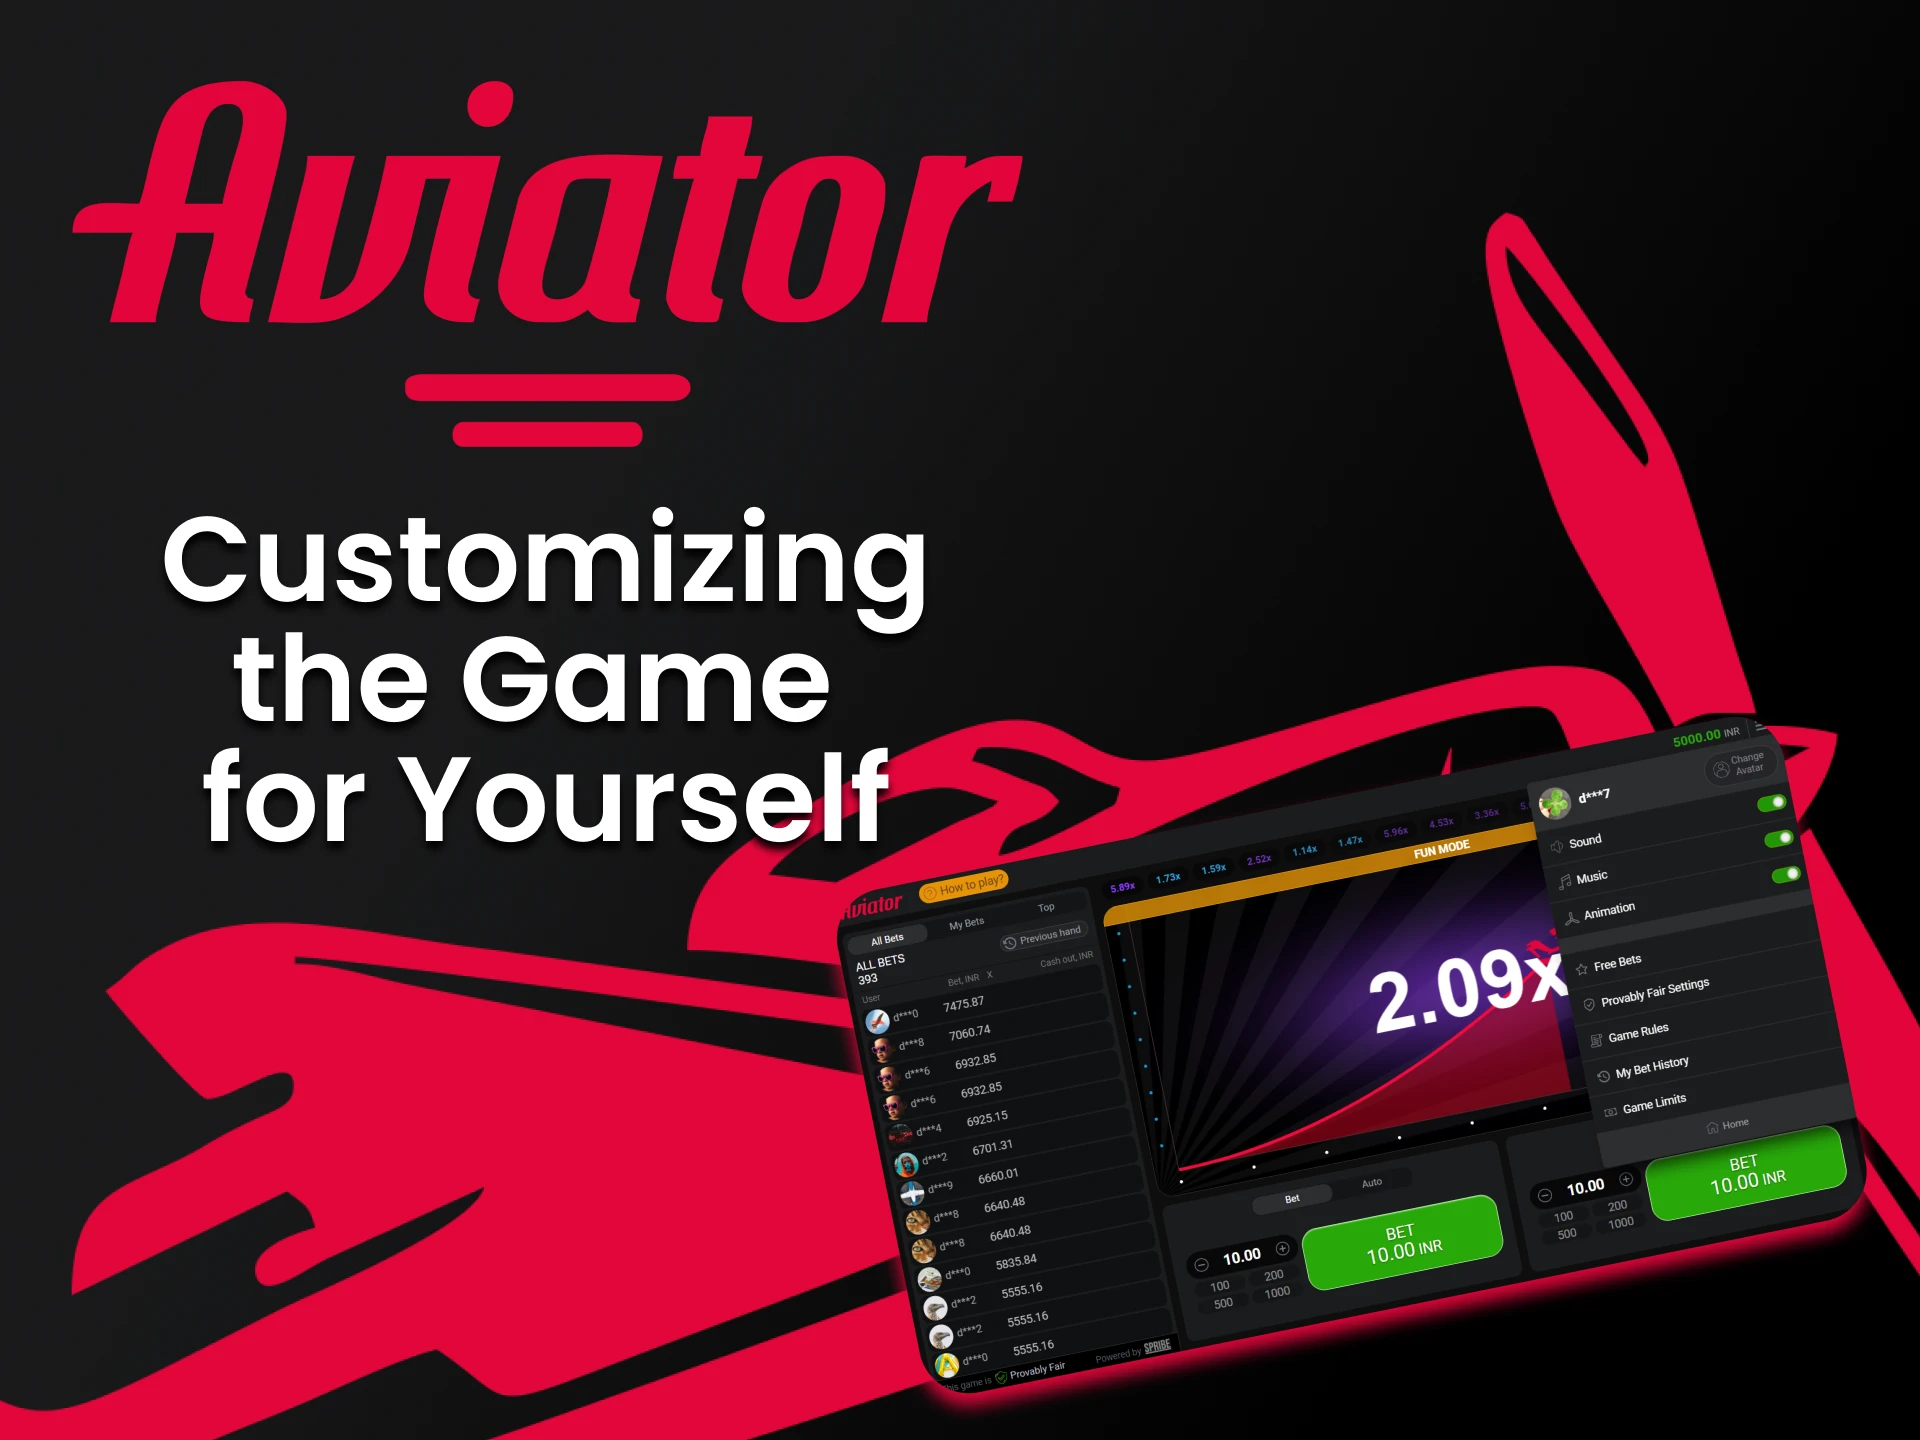 Customize the Aviator game for yourself.